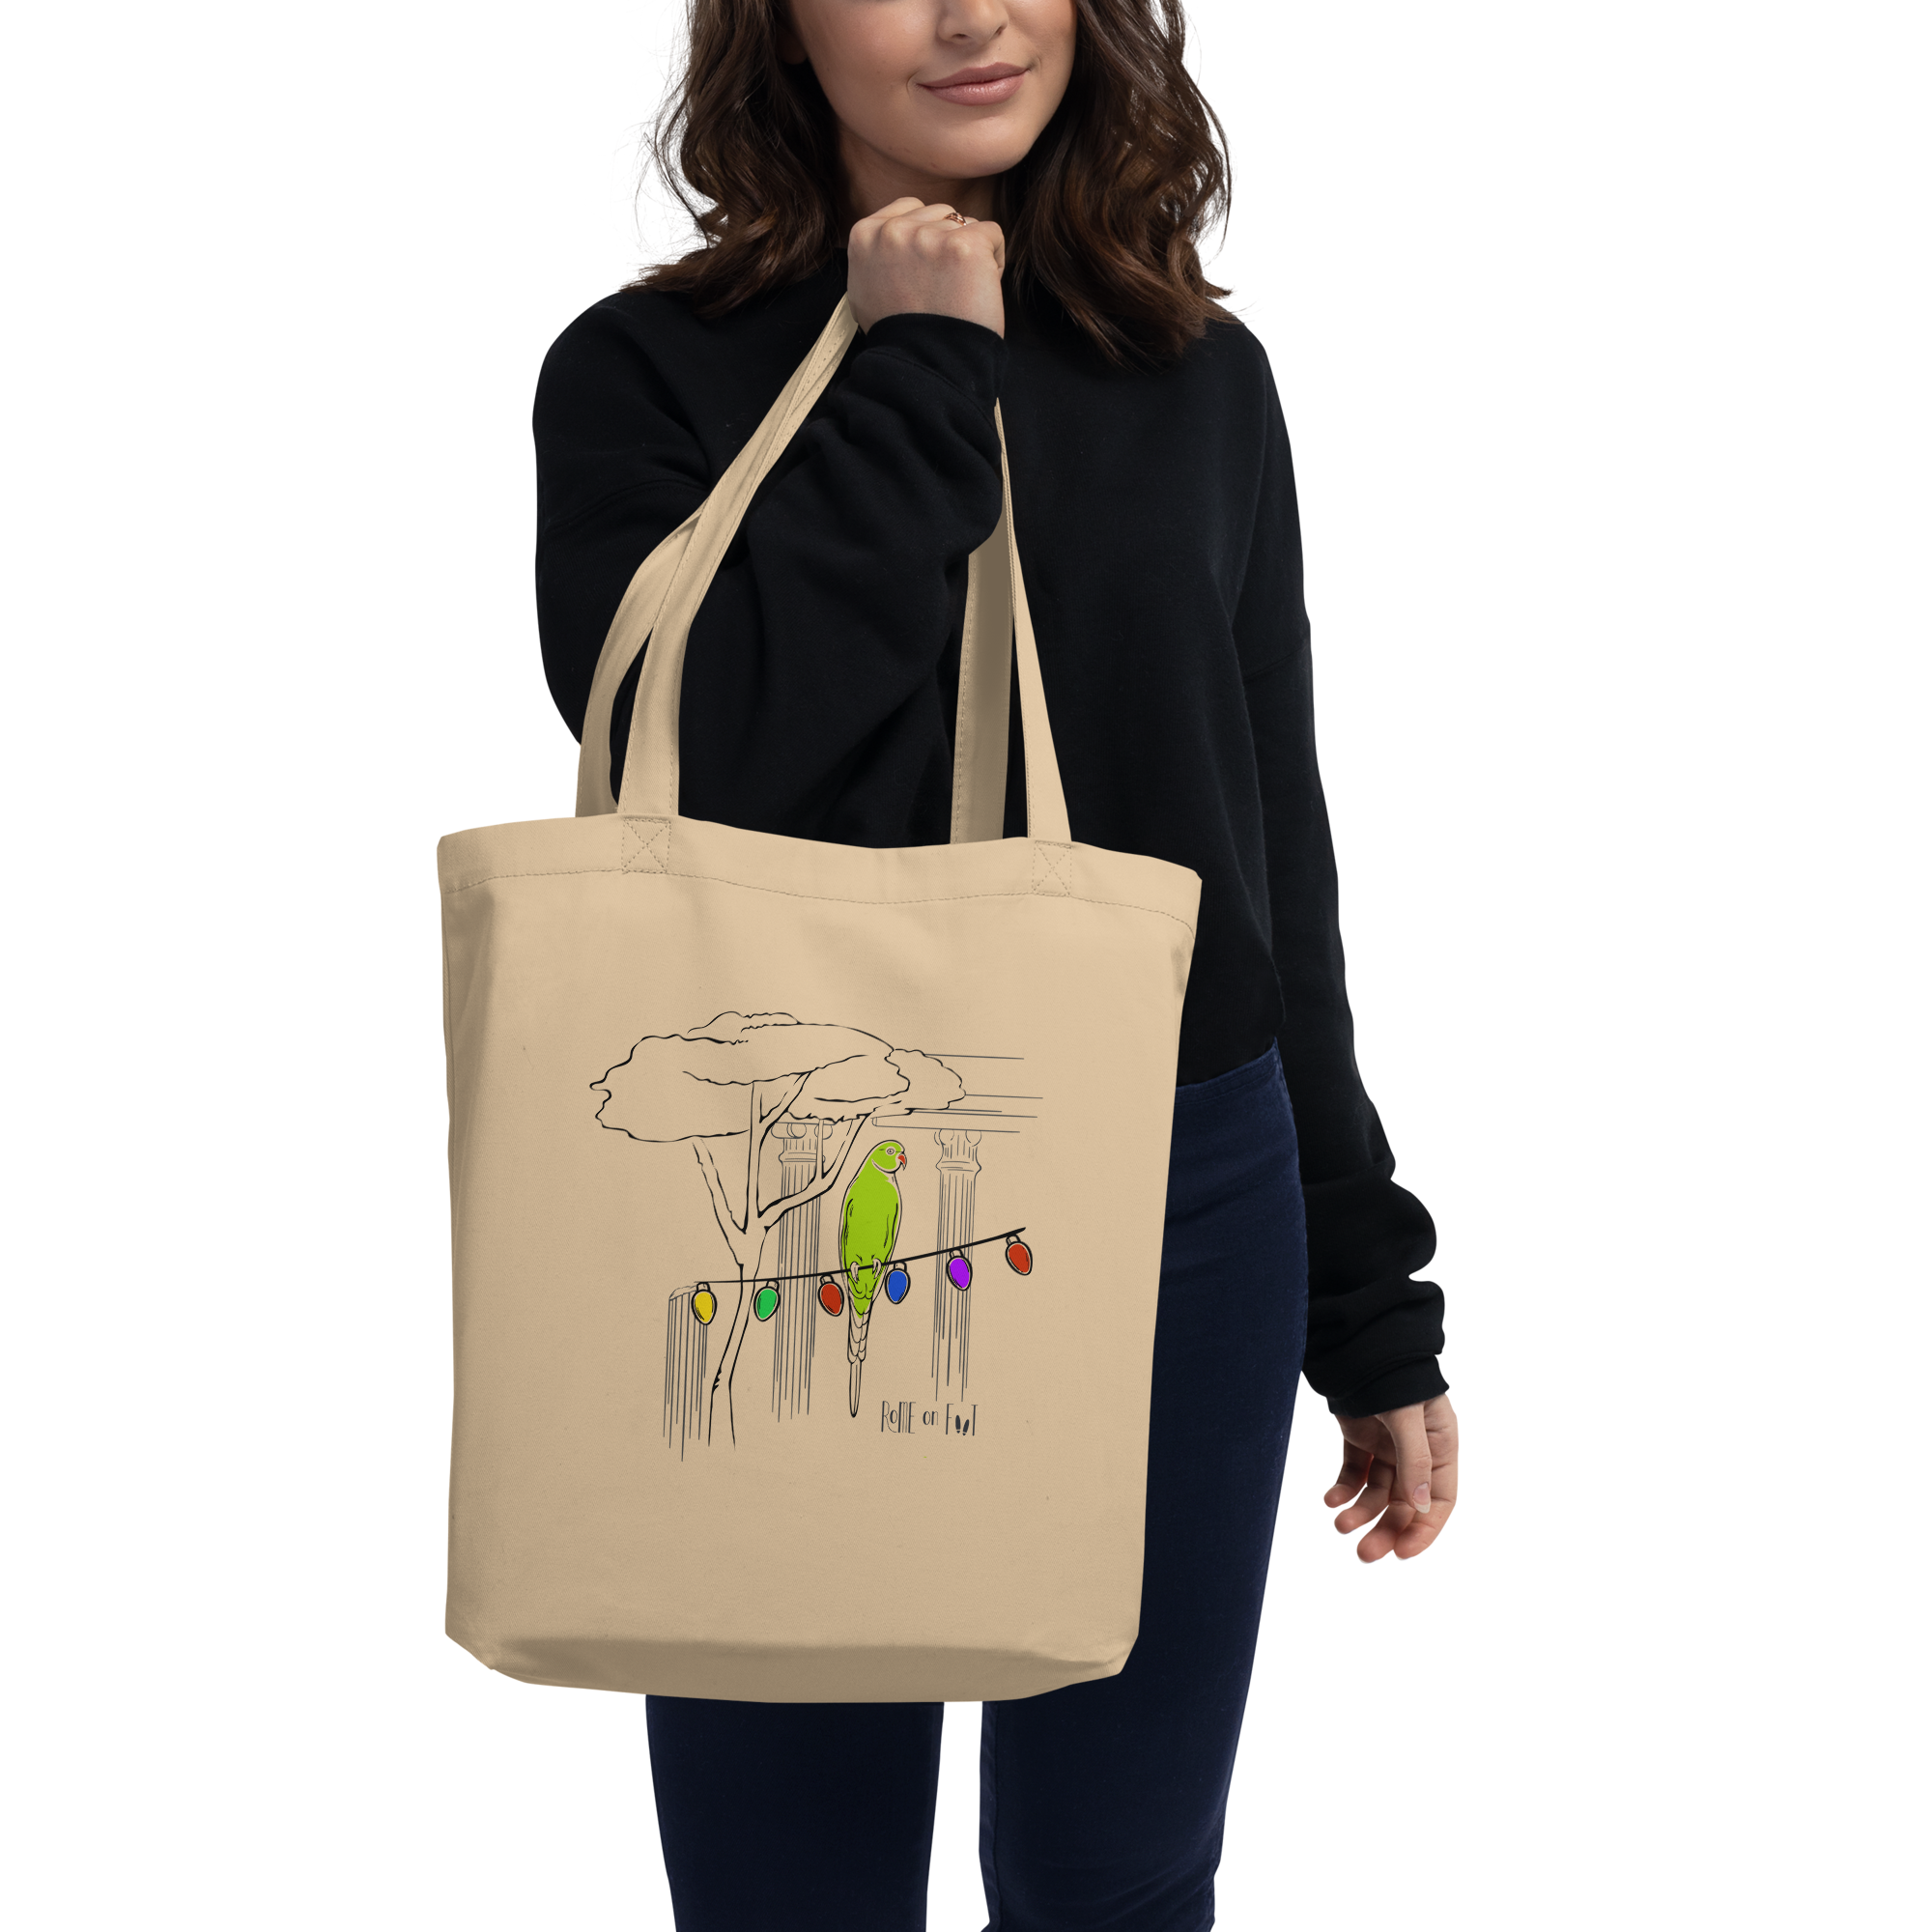 Eco-Friendly Organic Cotton Tote Bag | Rome & Holiday Parrots Design